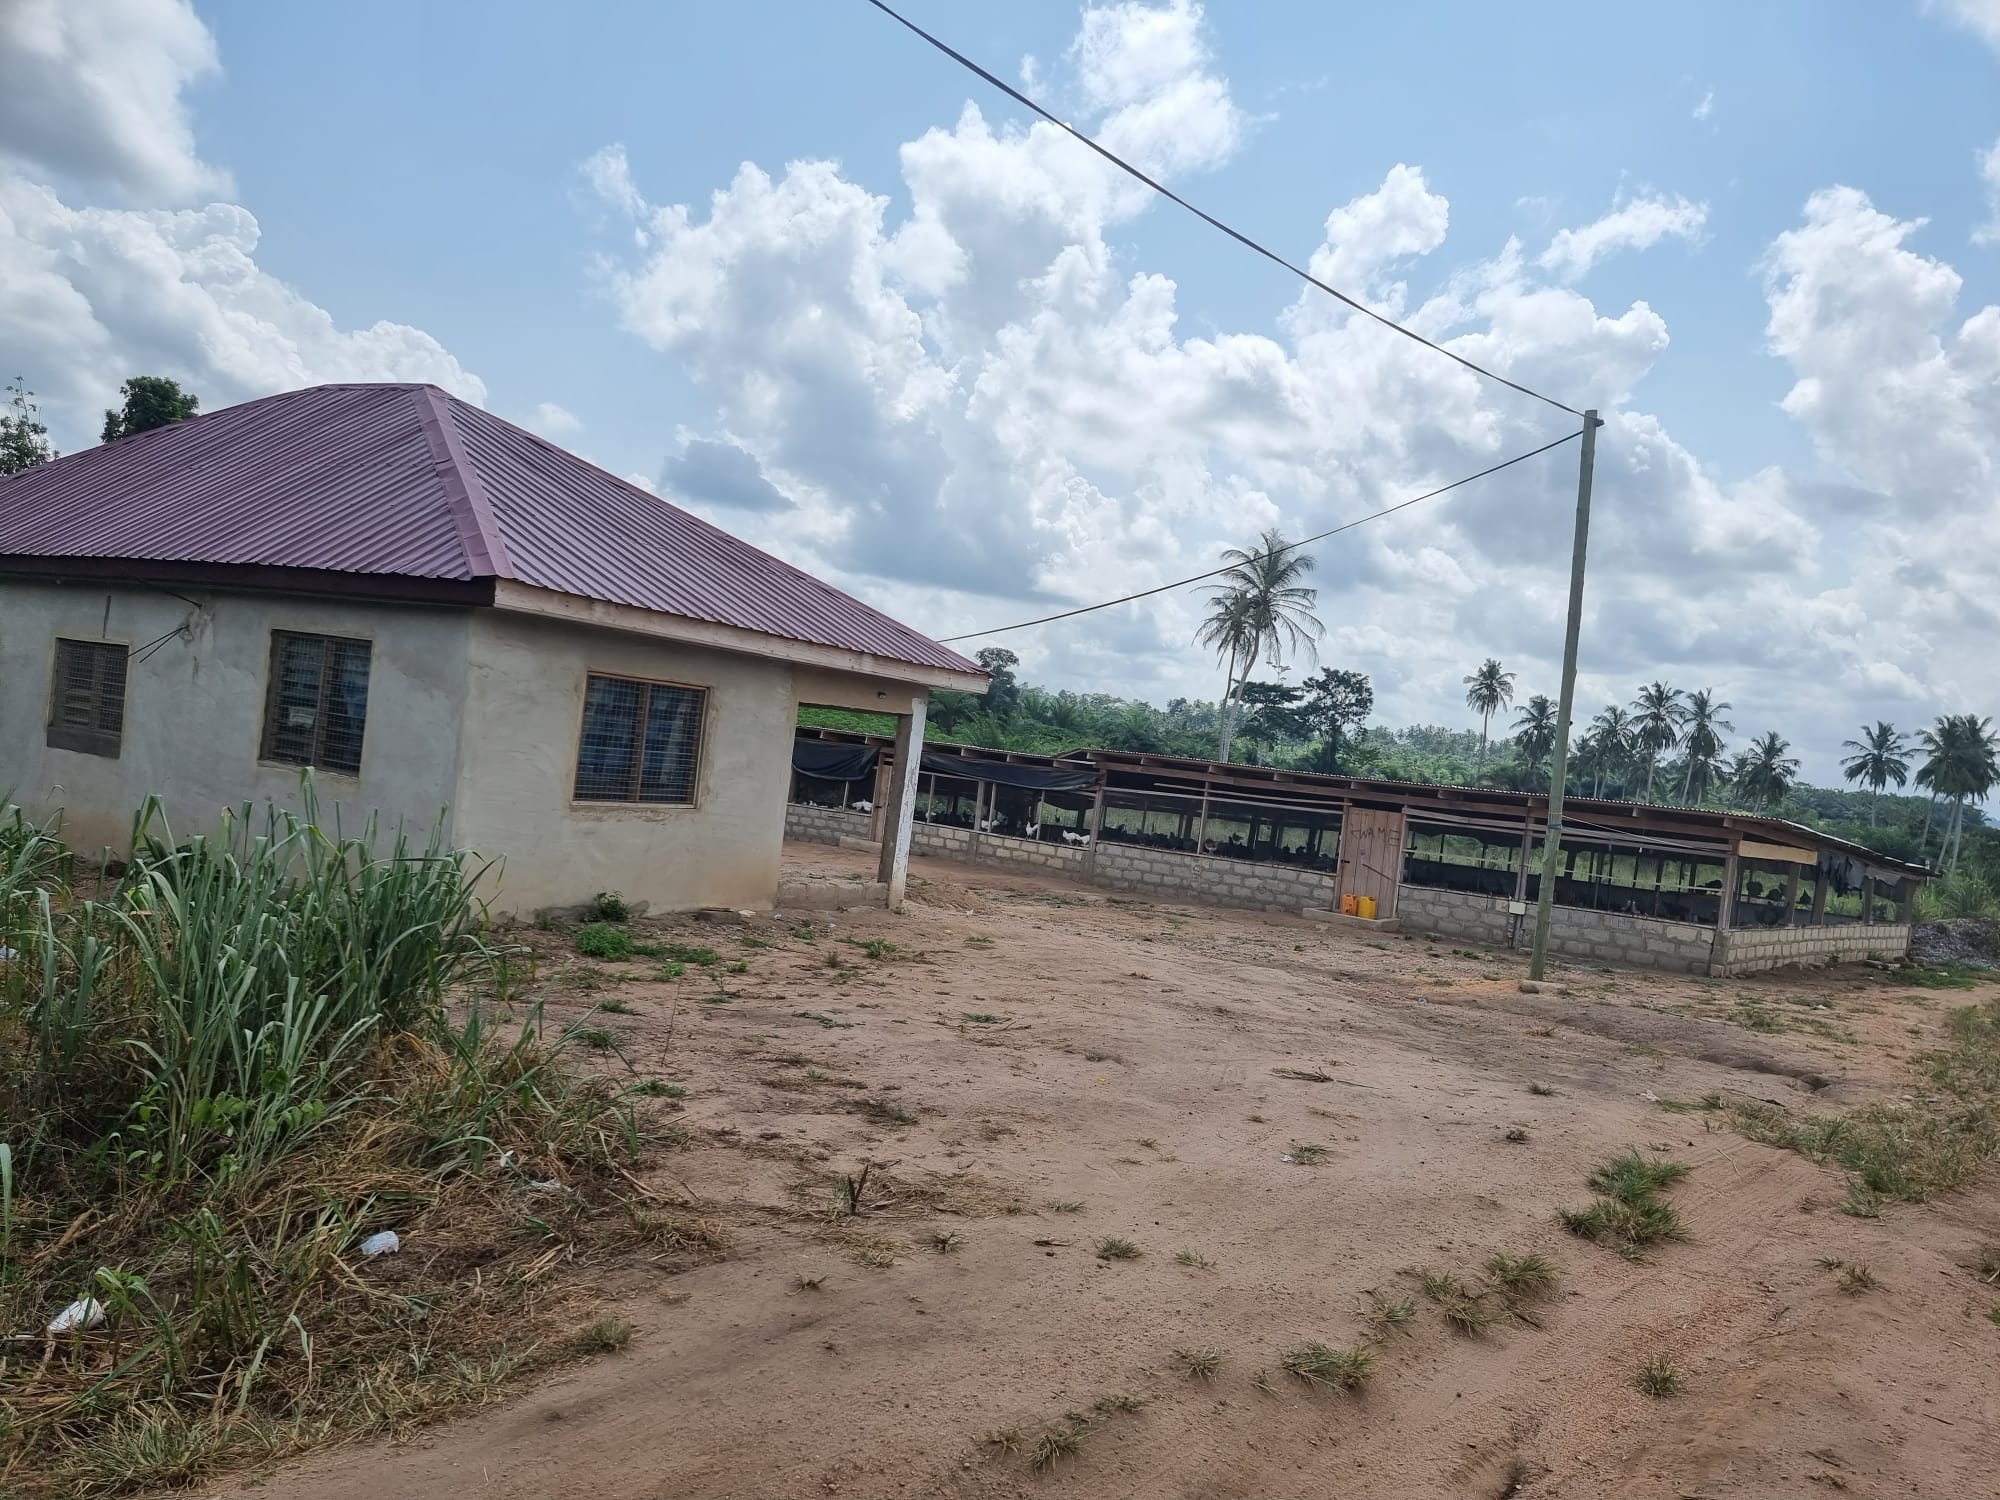 Poultry Farm with birds for sale